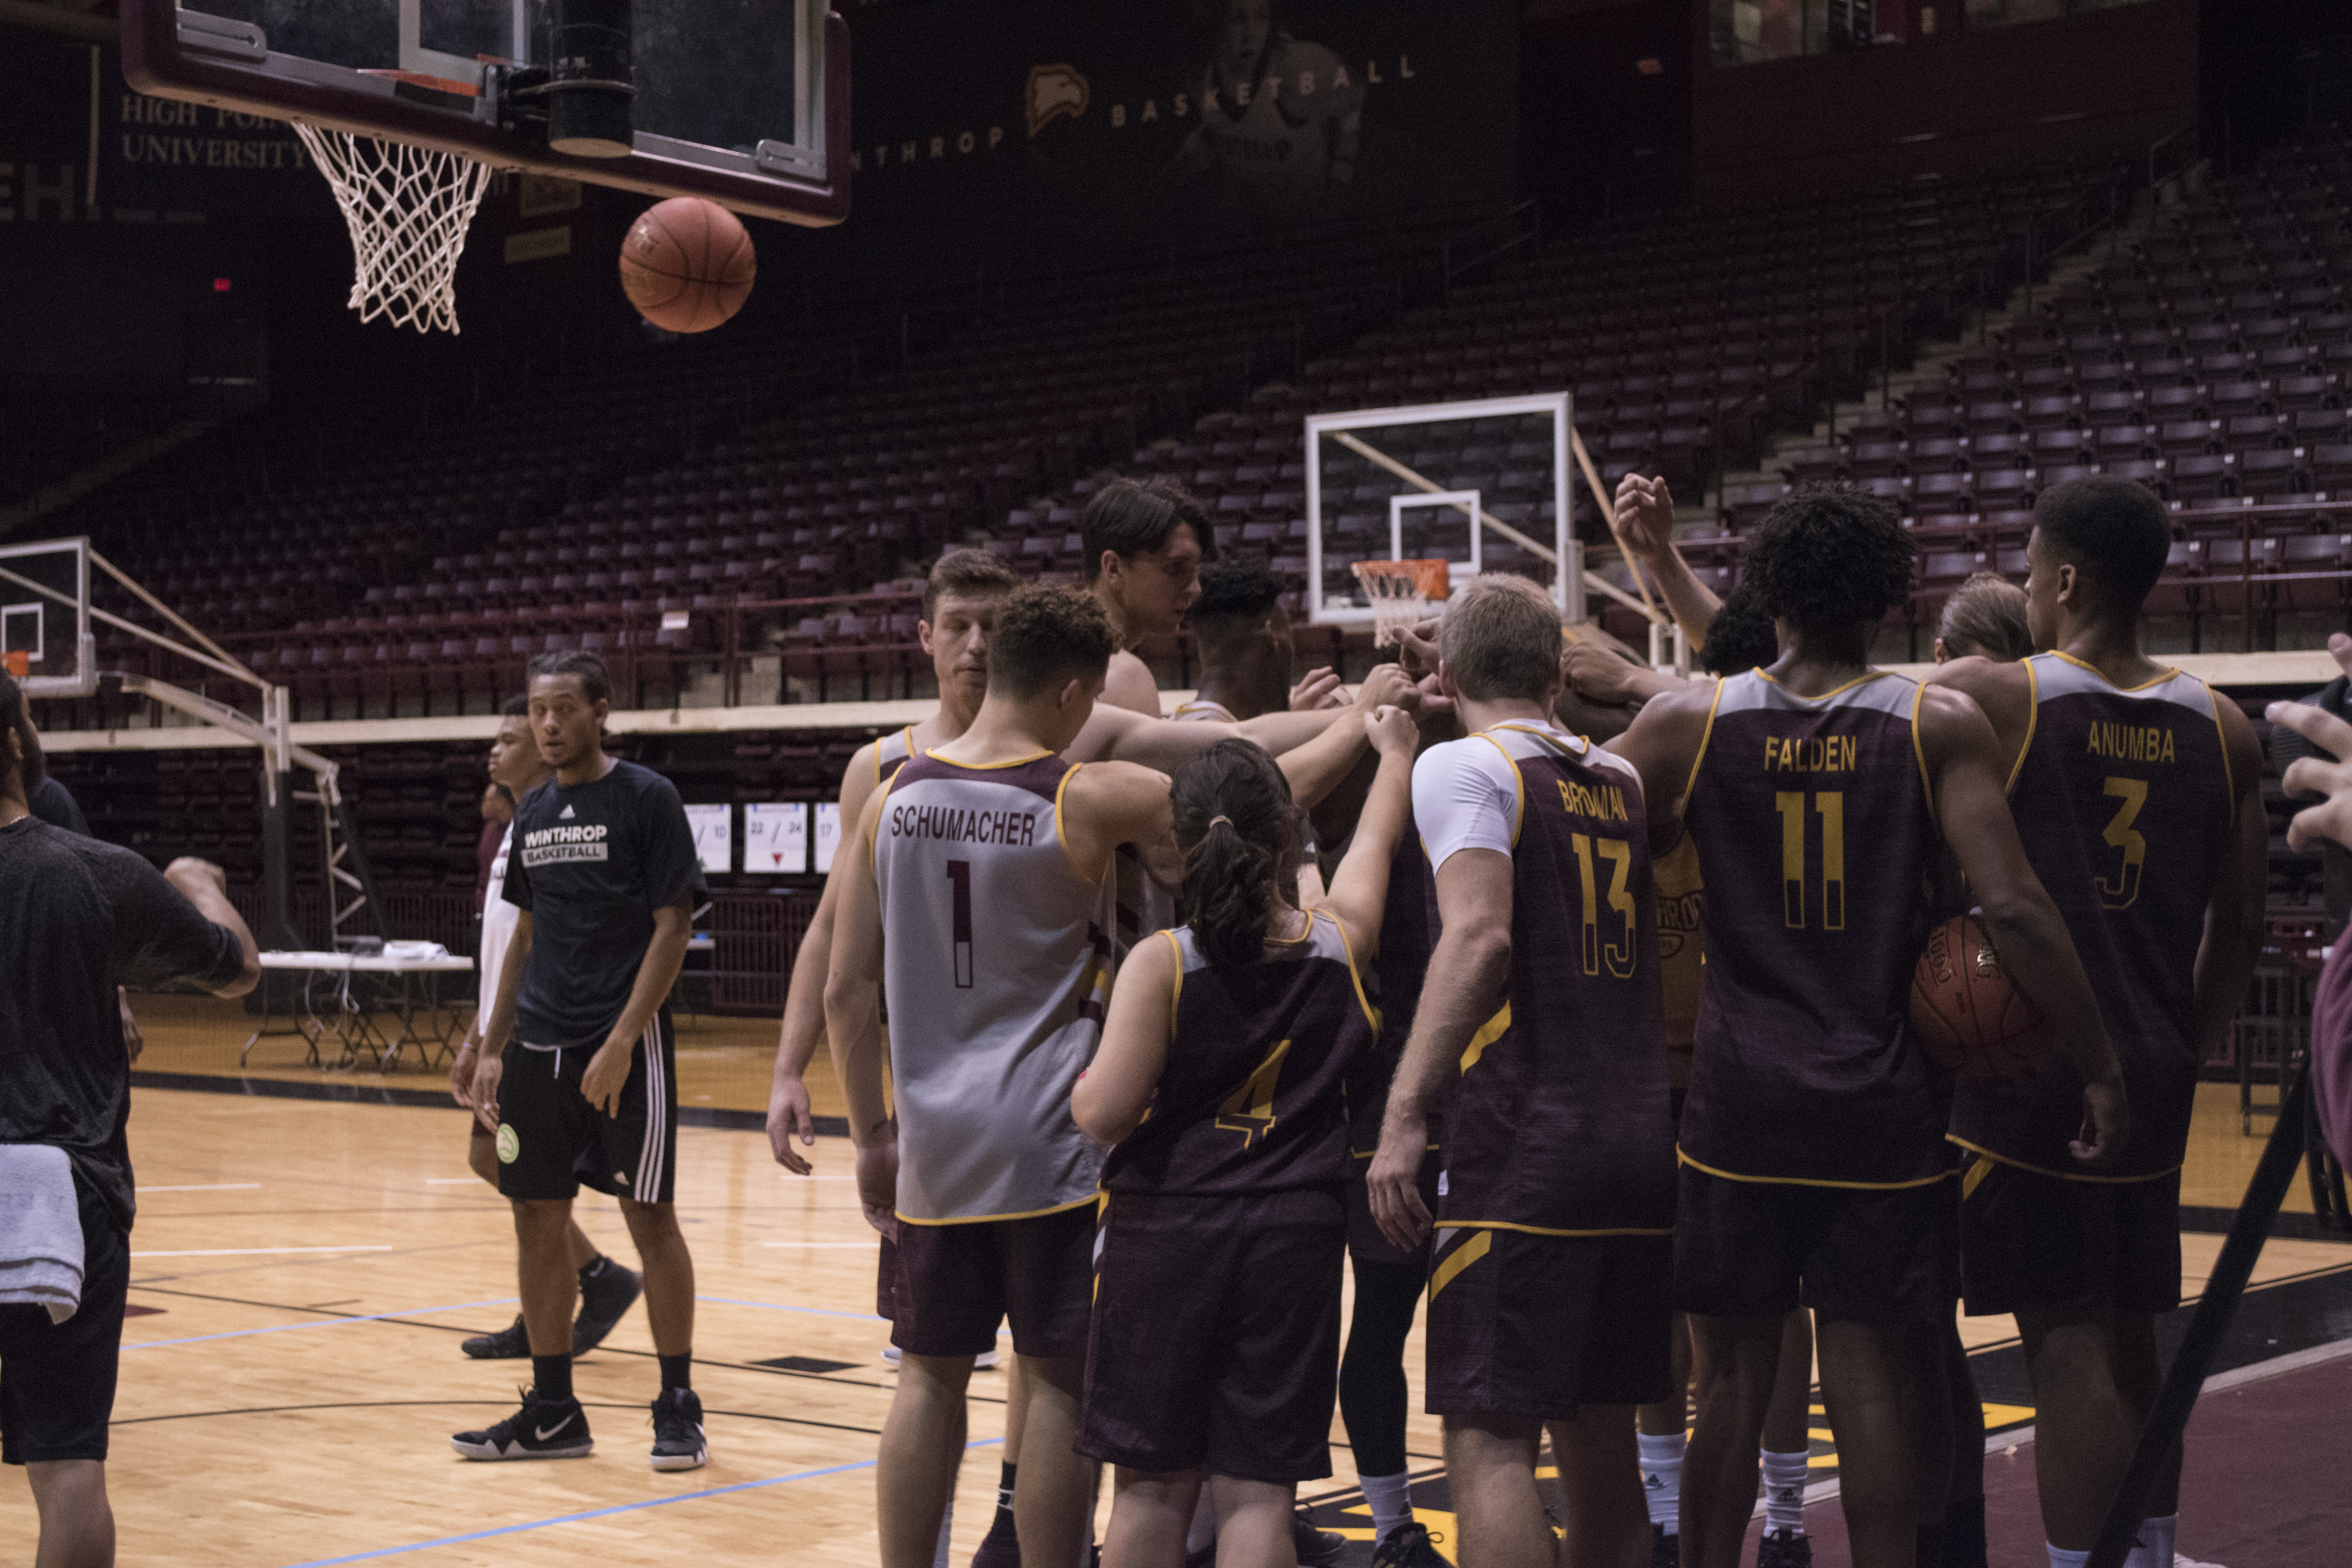 Get your head in the game with TJ: Female journalist shadows the men’s basketball team for the day